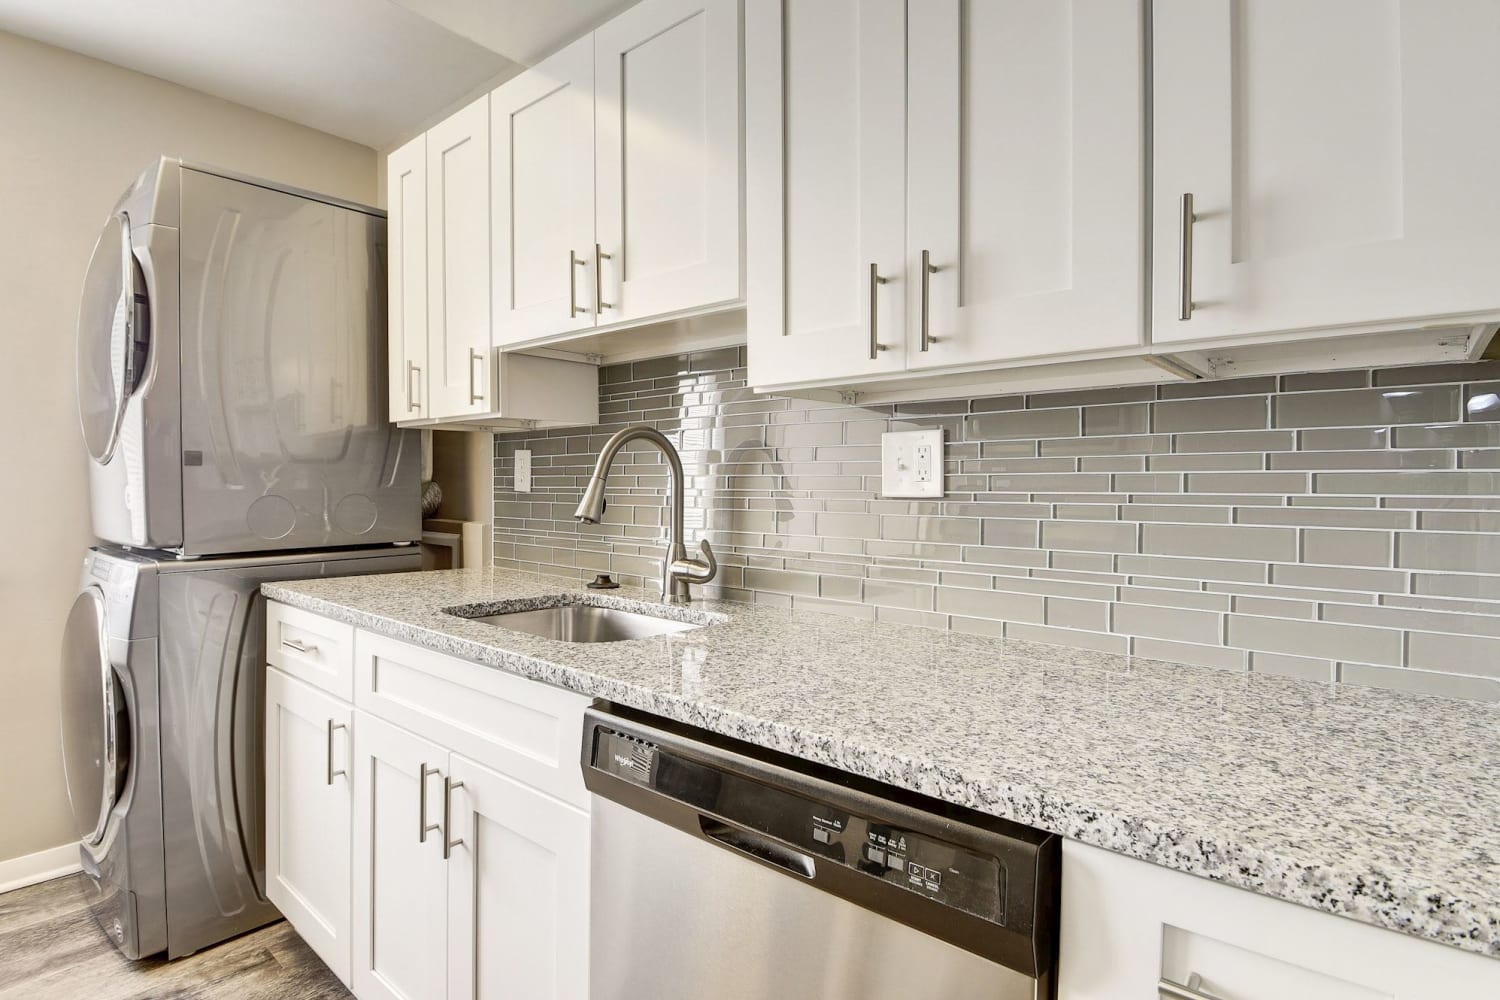 Kitchen with white cabinets, granite countertops, and stainless steel appliances